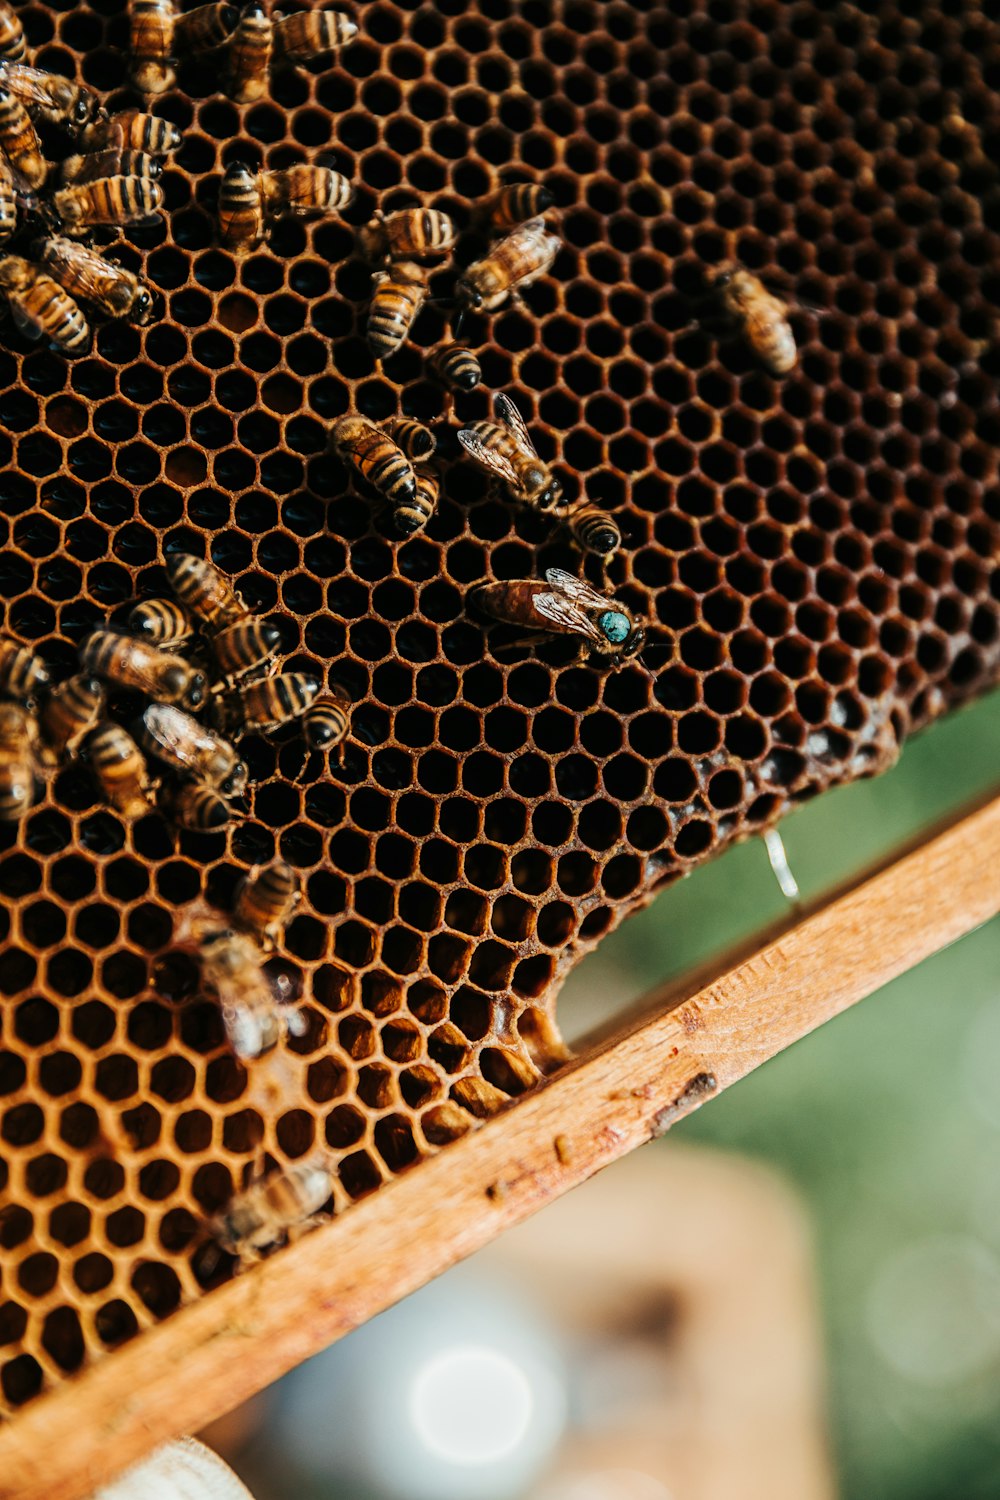 Honey Comb Pictures  Download Free Images on Unsplash